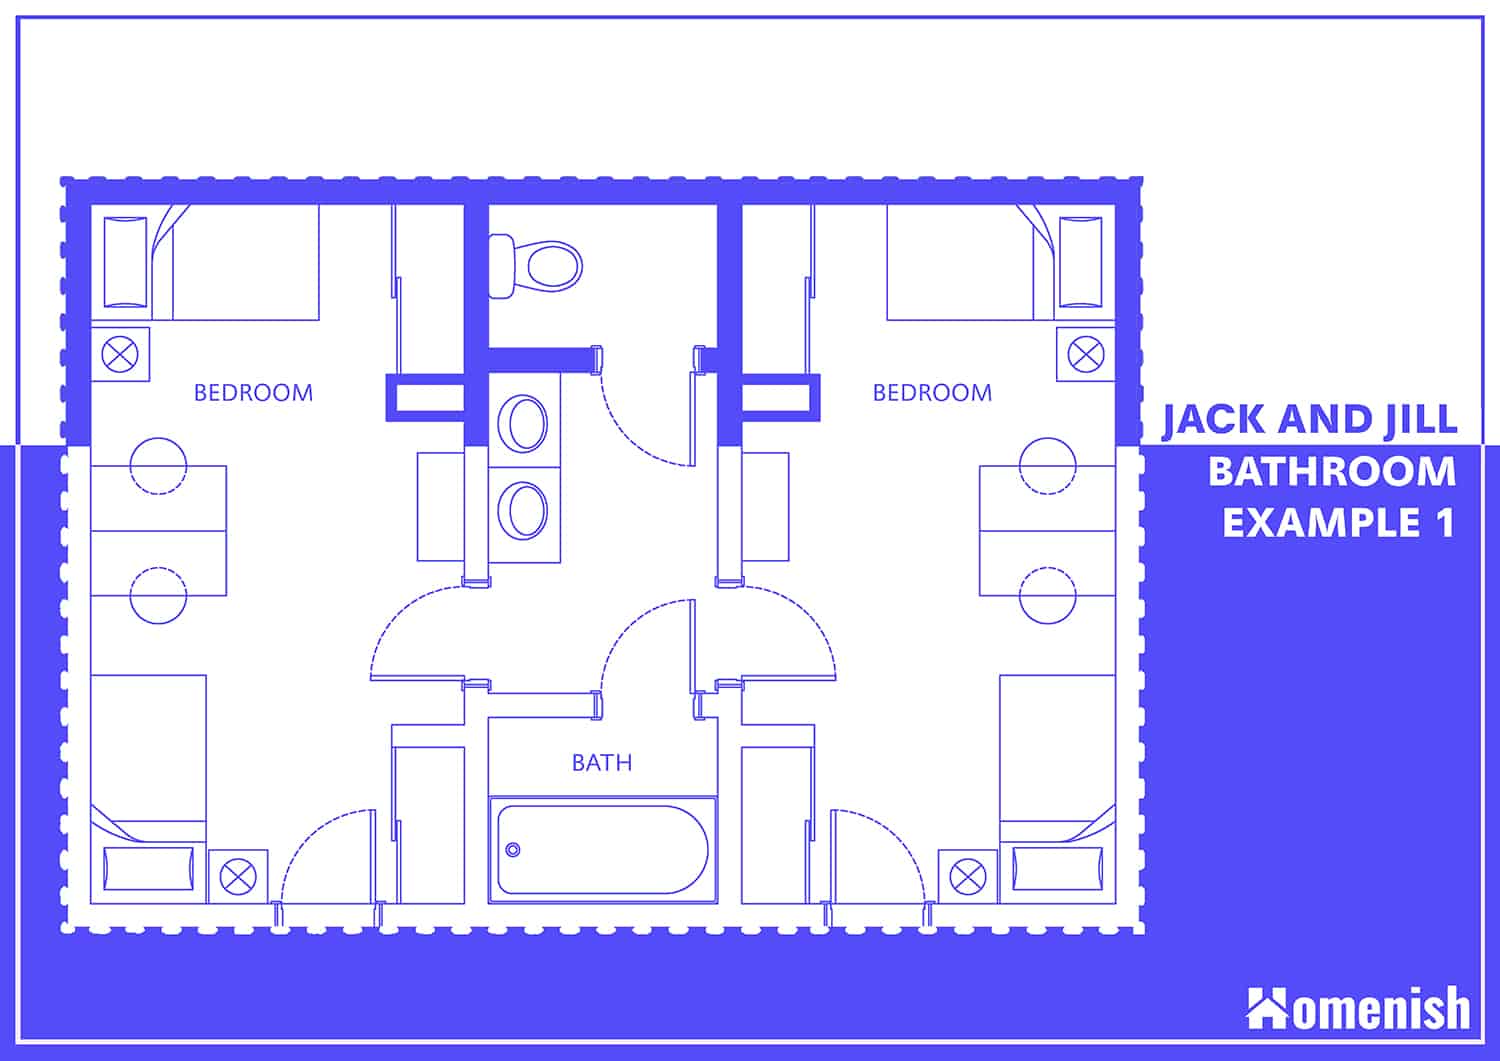 Jack and Jill Bathroom In the Middle